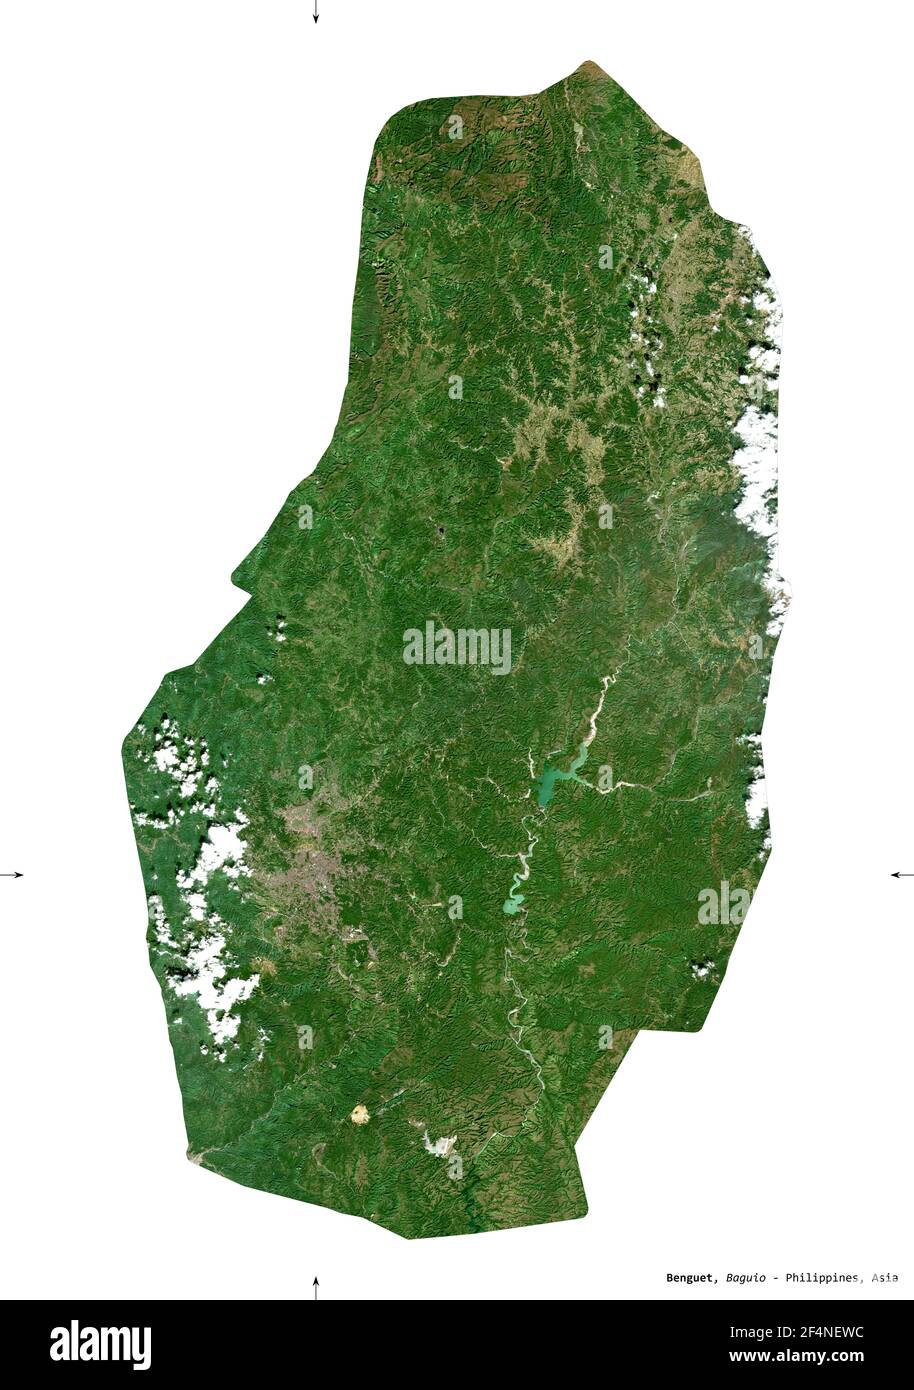 Benguet Province Of Philippines Sentinel 2 Satellite Imagery Shape Isolated On White Solid Description Location Of The Capital Contains Modified 2F4NEWC 